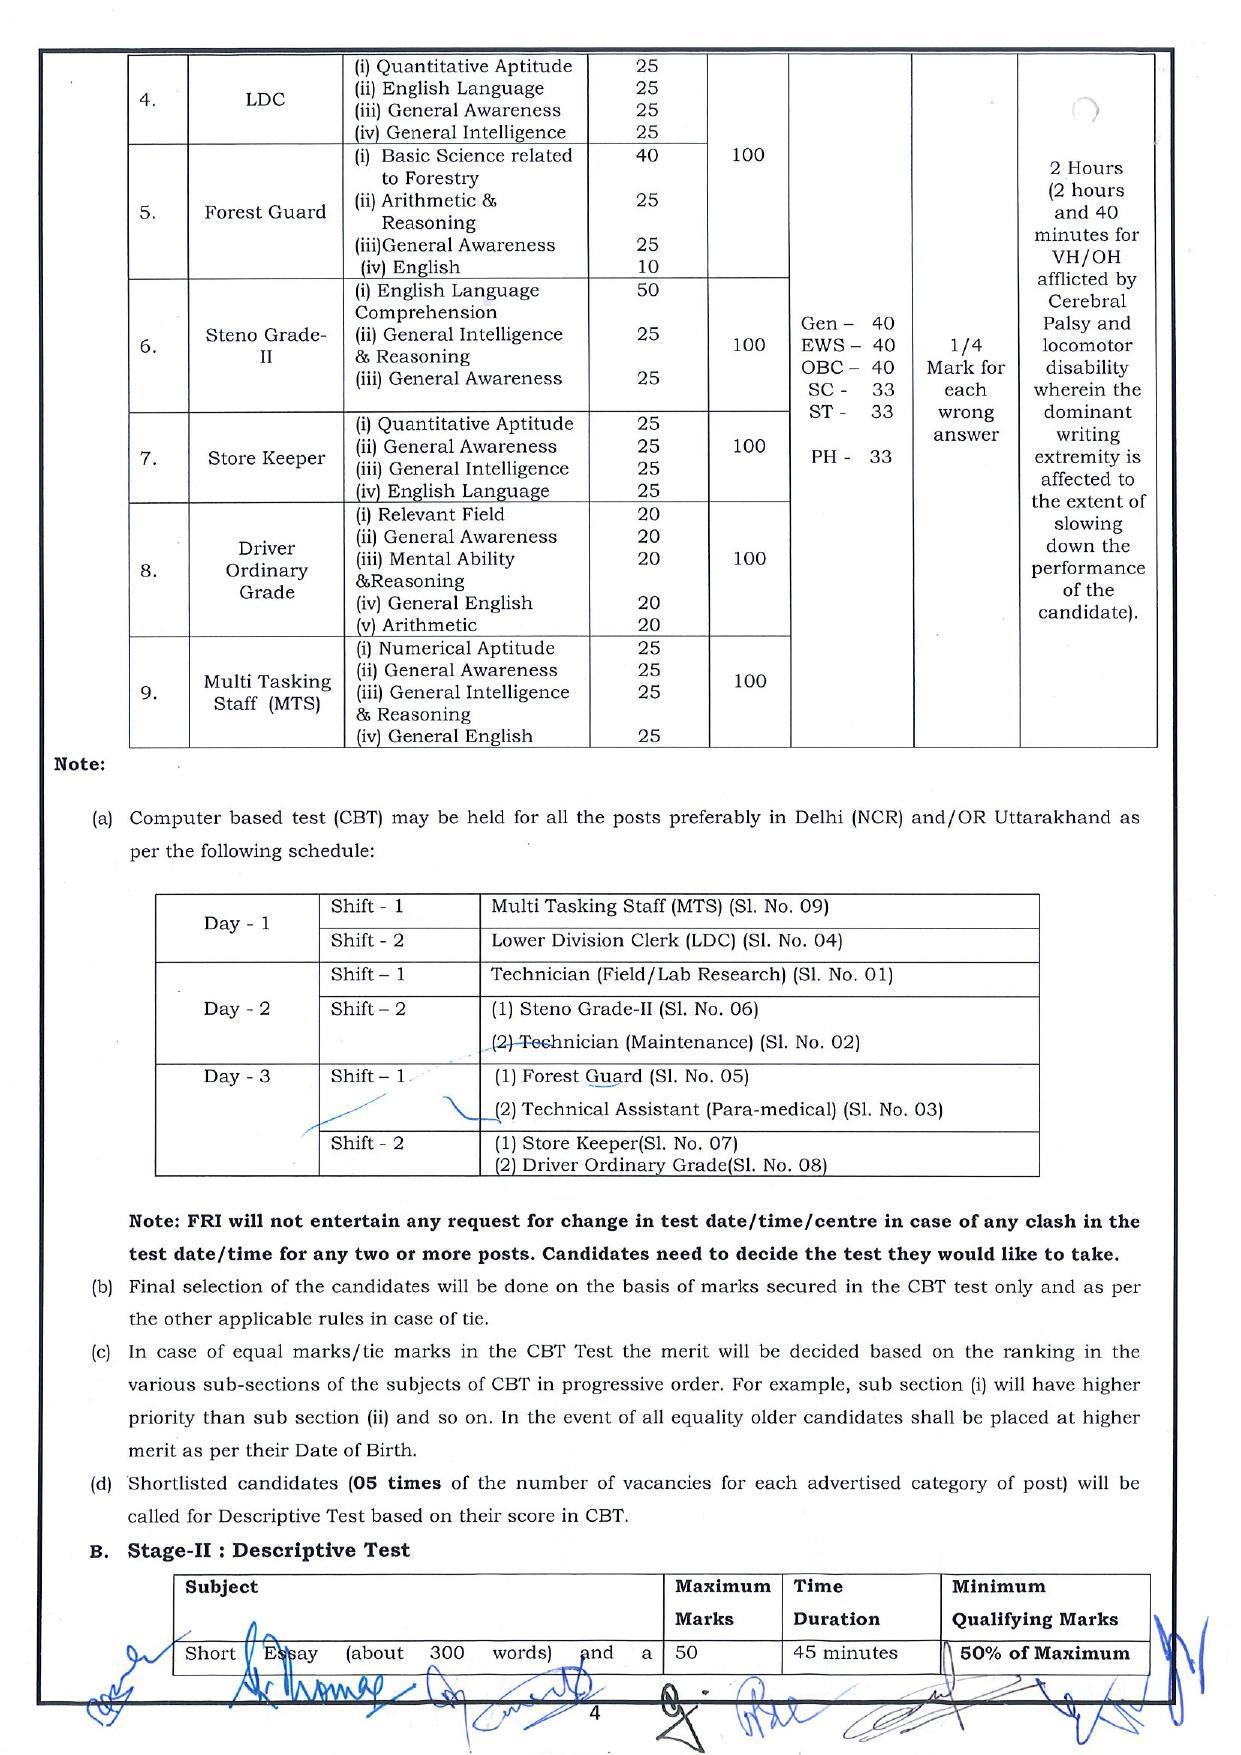 Forest Research Institute Dehradun (FRI Dehradun) Invites Application for 72 MTS, LDC and Various Posts - Page 20